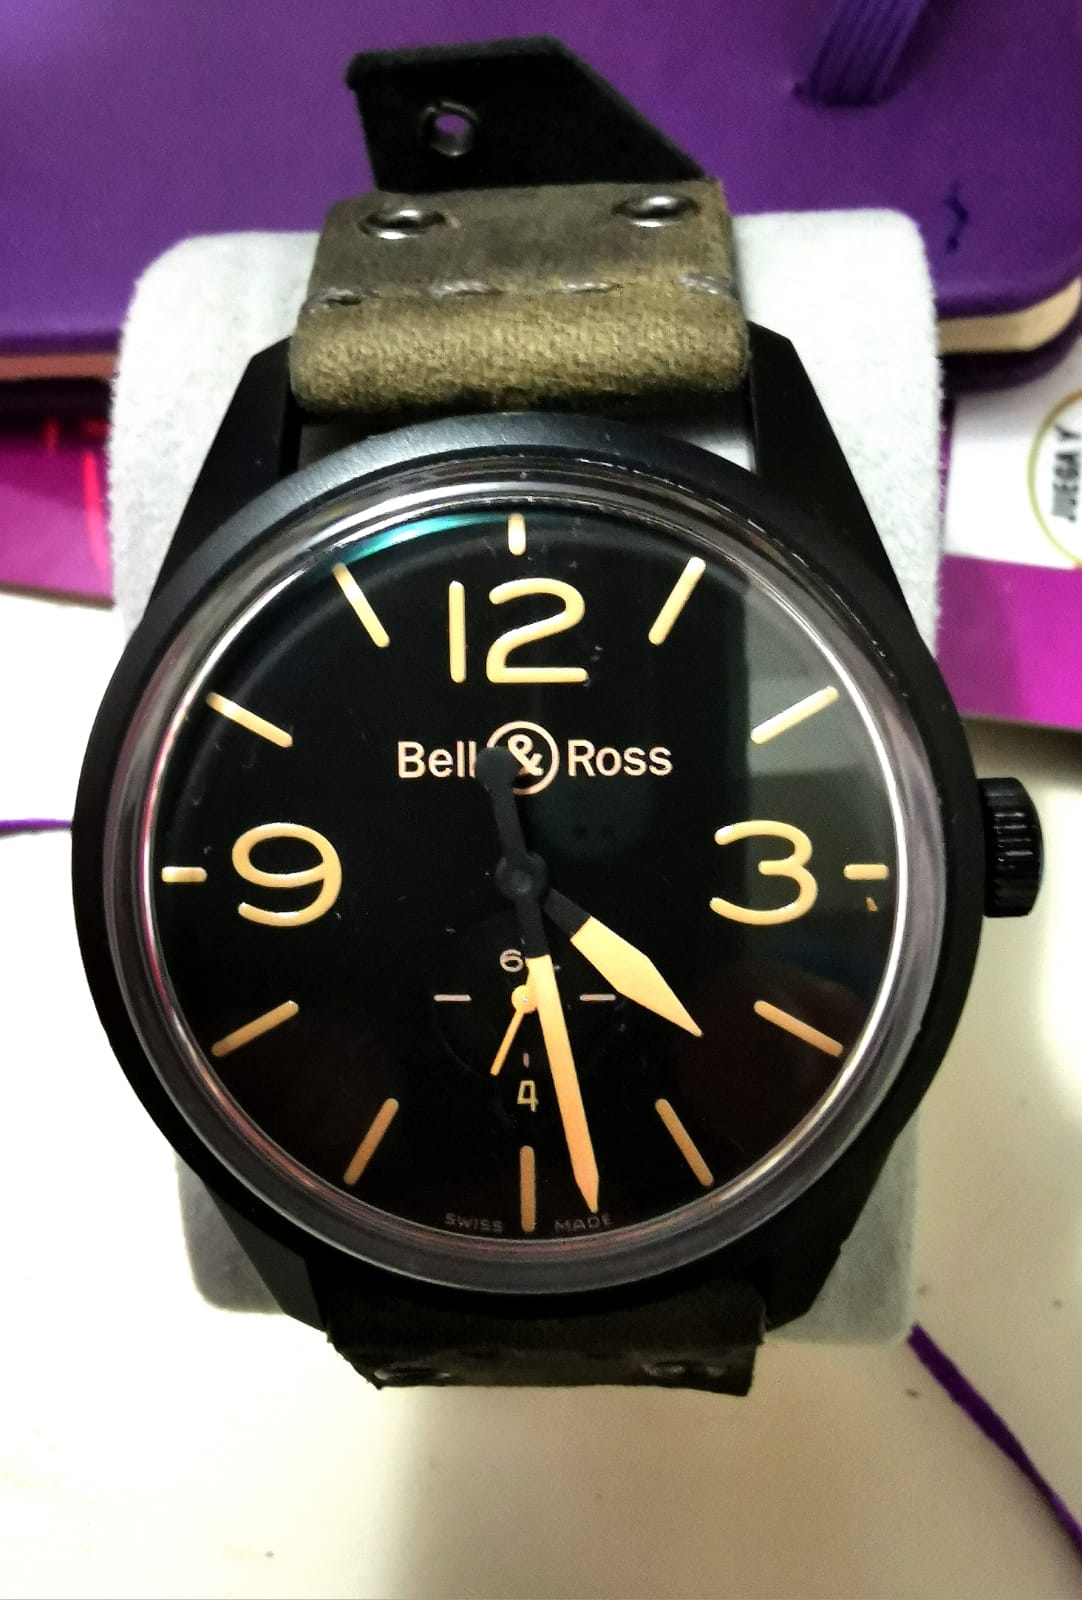 Bell & Ross Heritage 123 BRV123-HERITAGE/2 - pre owned - Maple City Timepieces